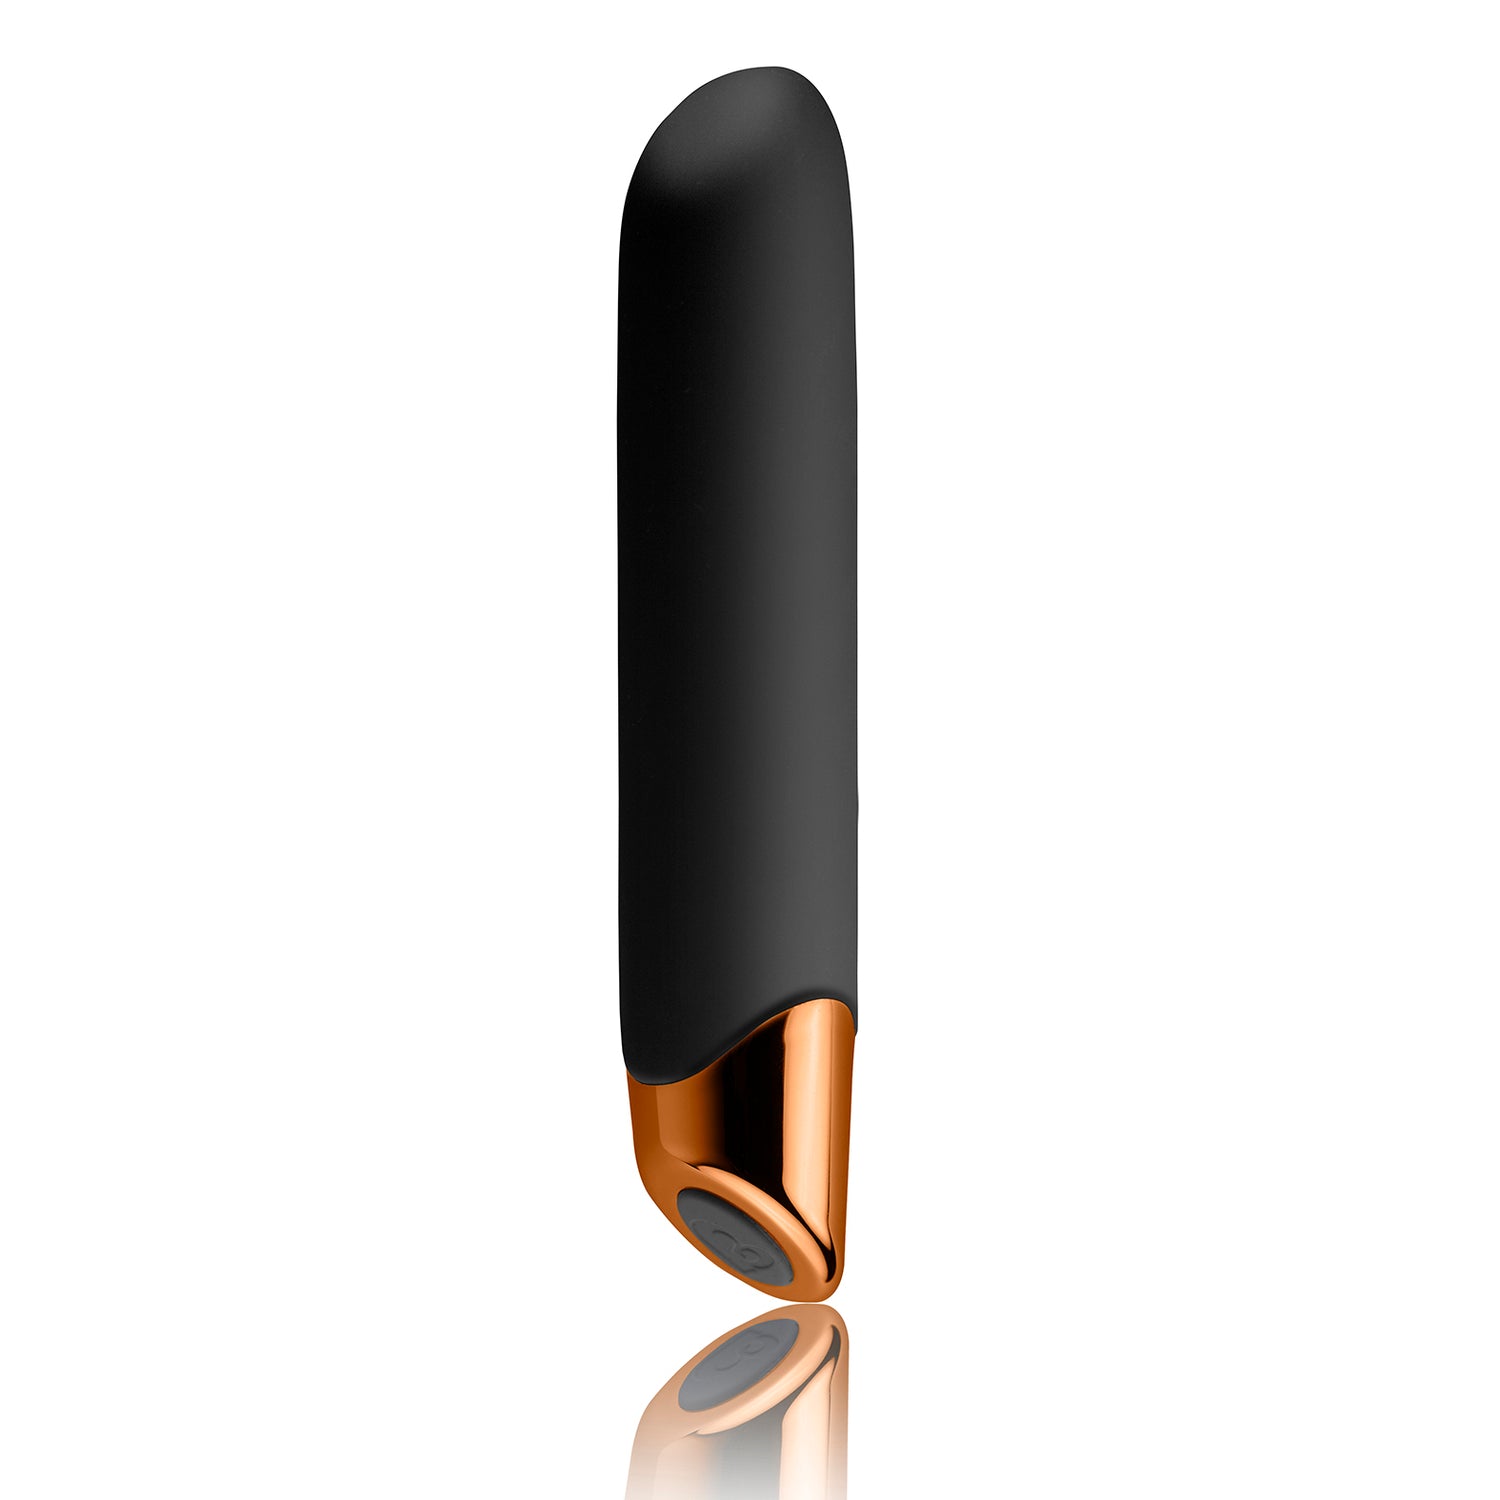 Chaiamo Rechargeable Black - Just for you desires